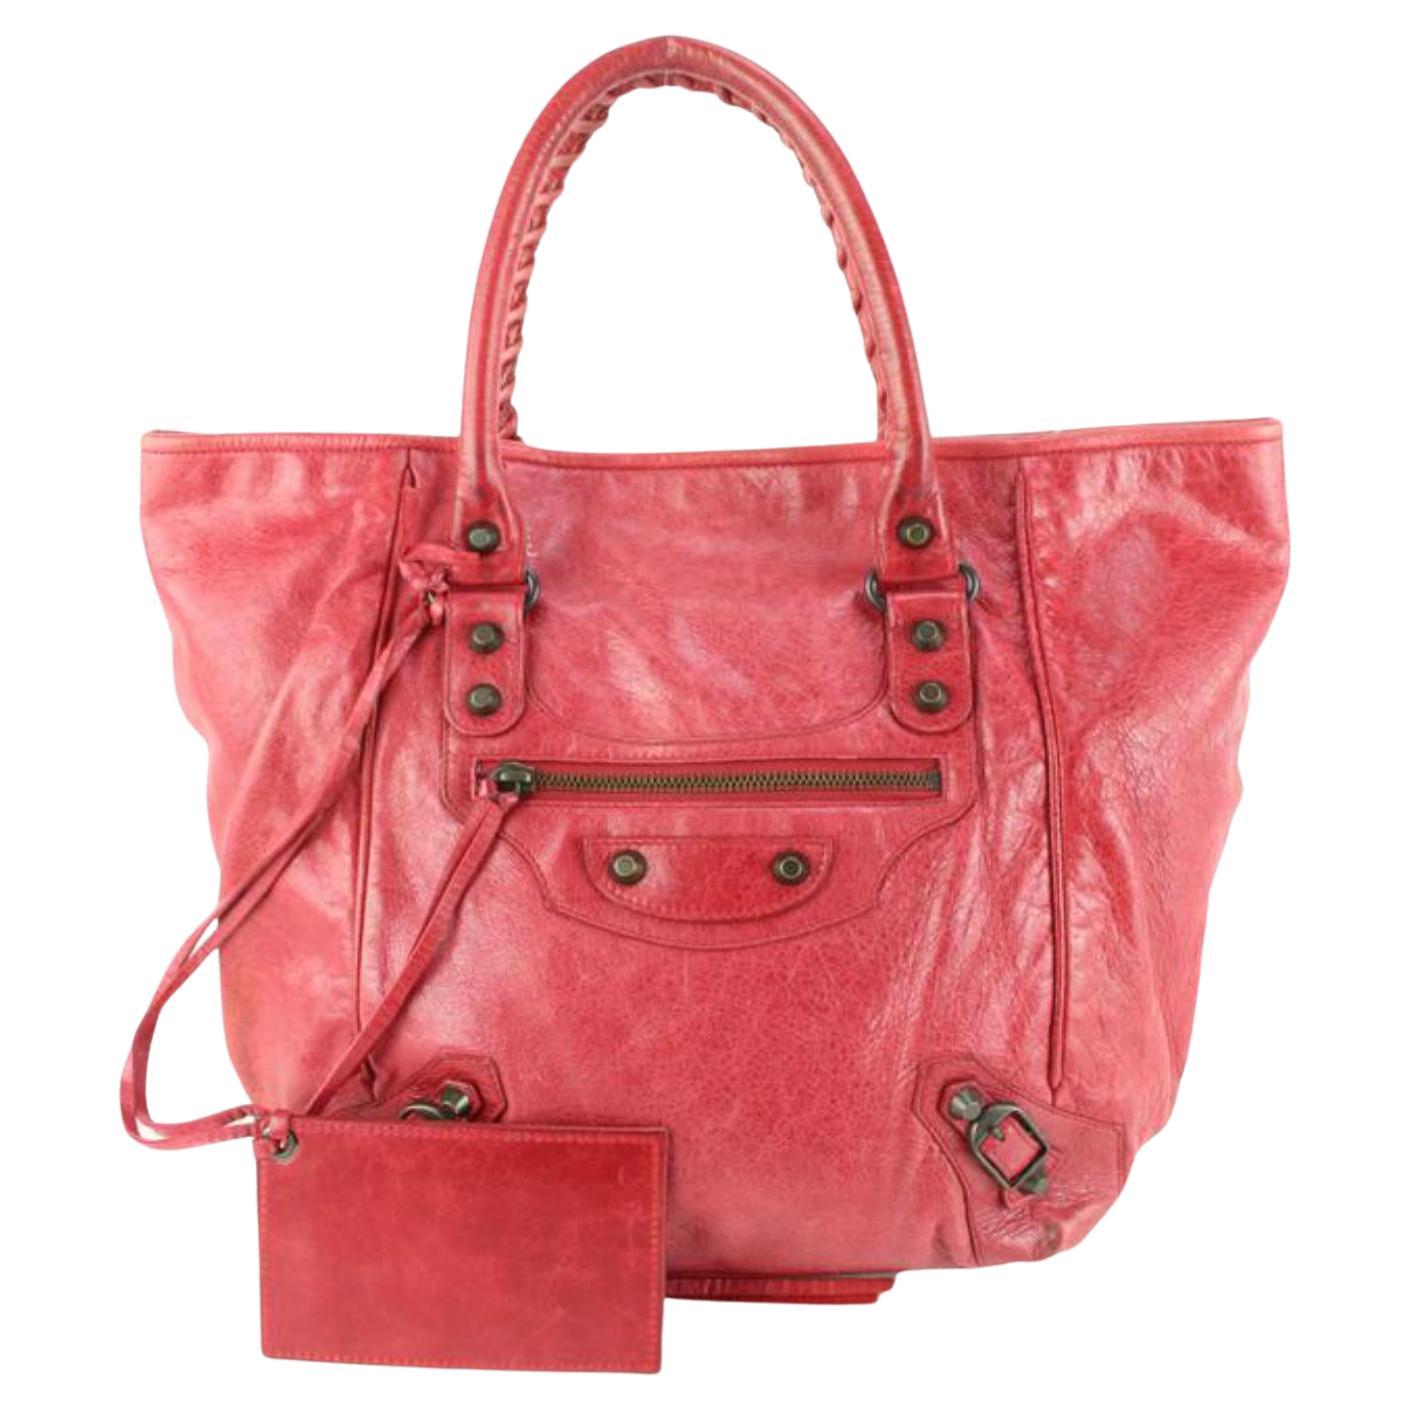 Balenciaga Red Sang Lambskin Leather S Sunday Tote 98ba52s For Sale